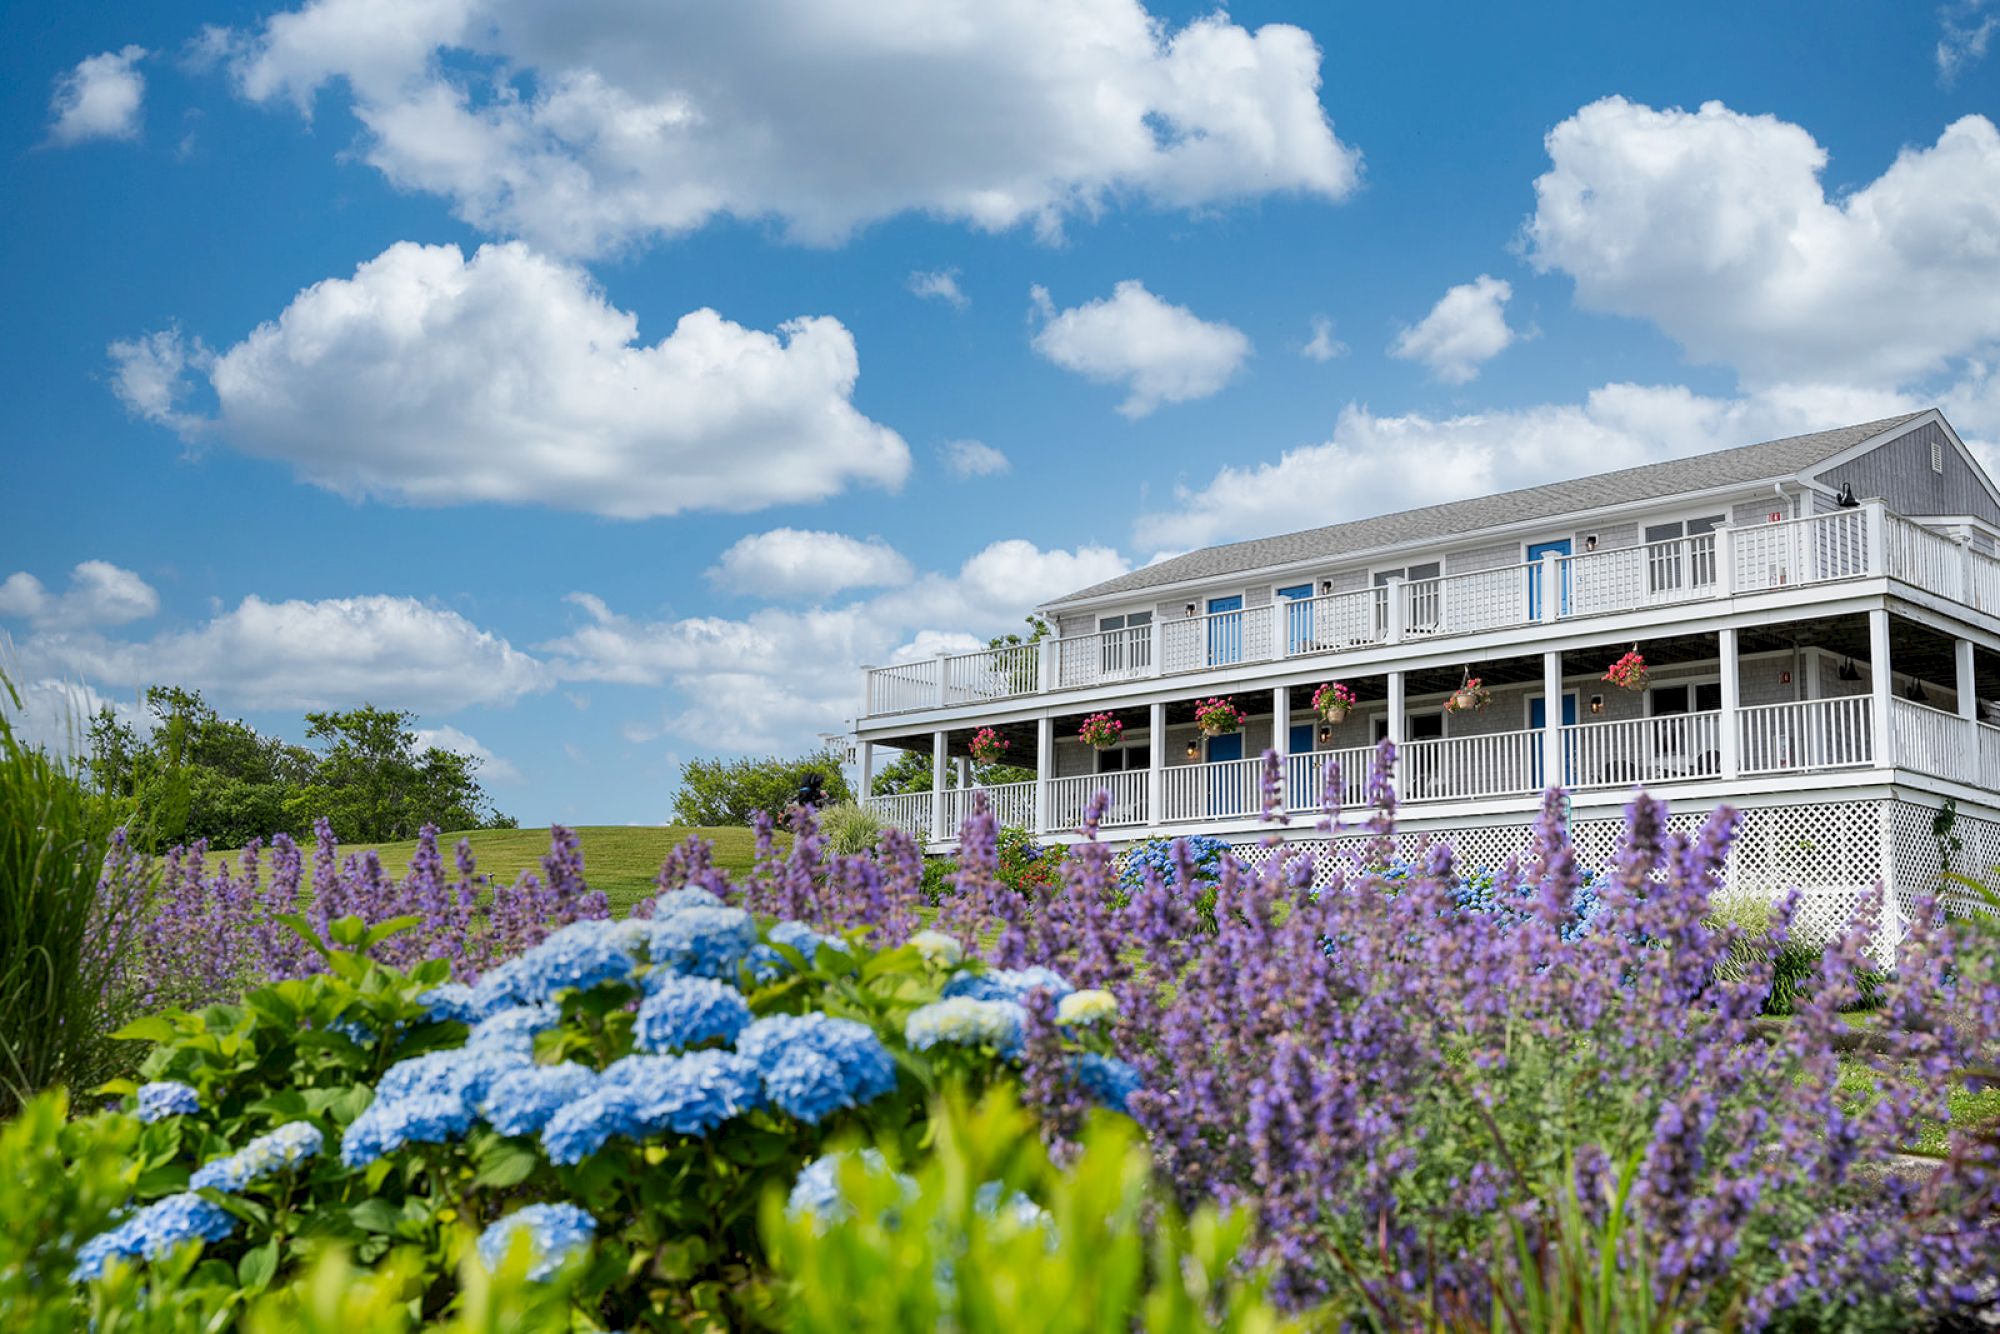 A large house with a wraparound veranda, surrounded by vibrant blue and purple flowers and a lush garden under a blue sky with scattered clouds.